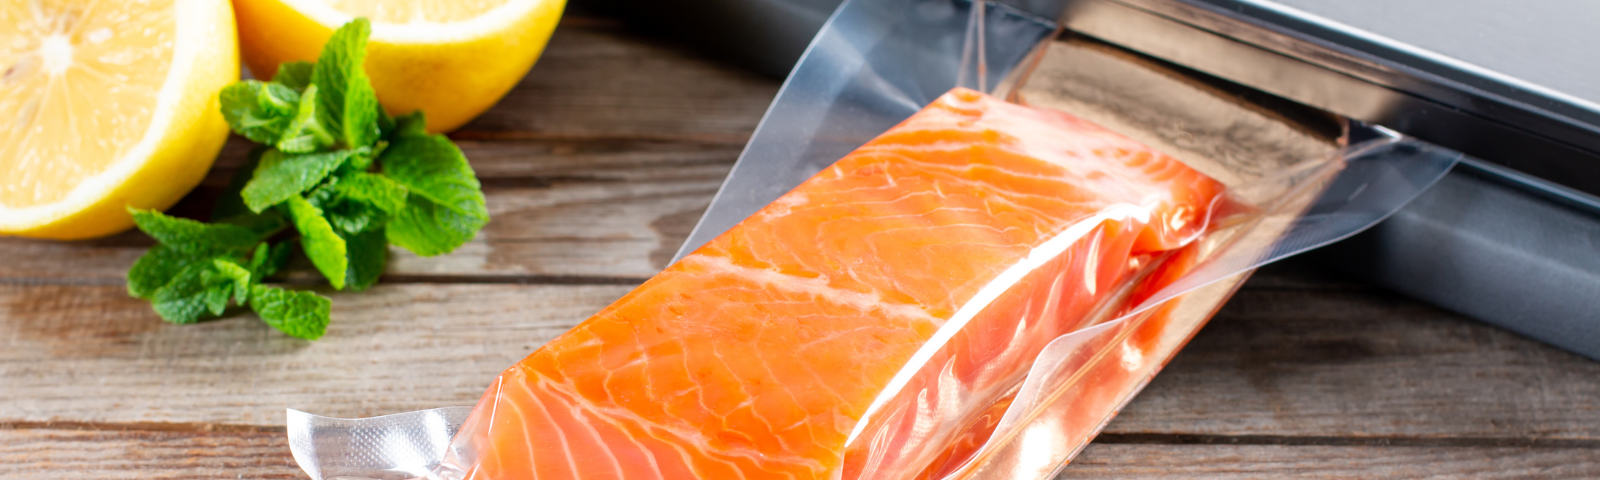 A salmon fillet shrink wrapped in plastic